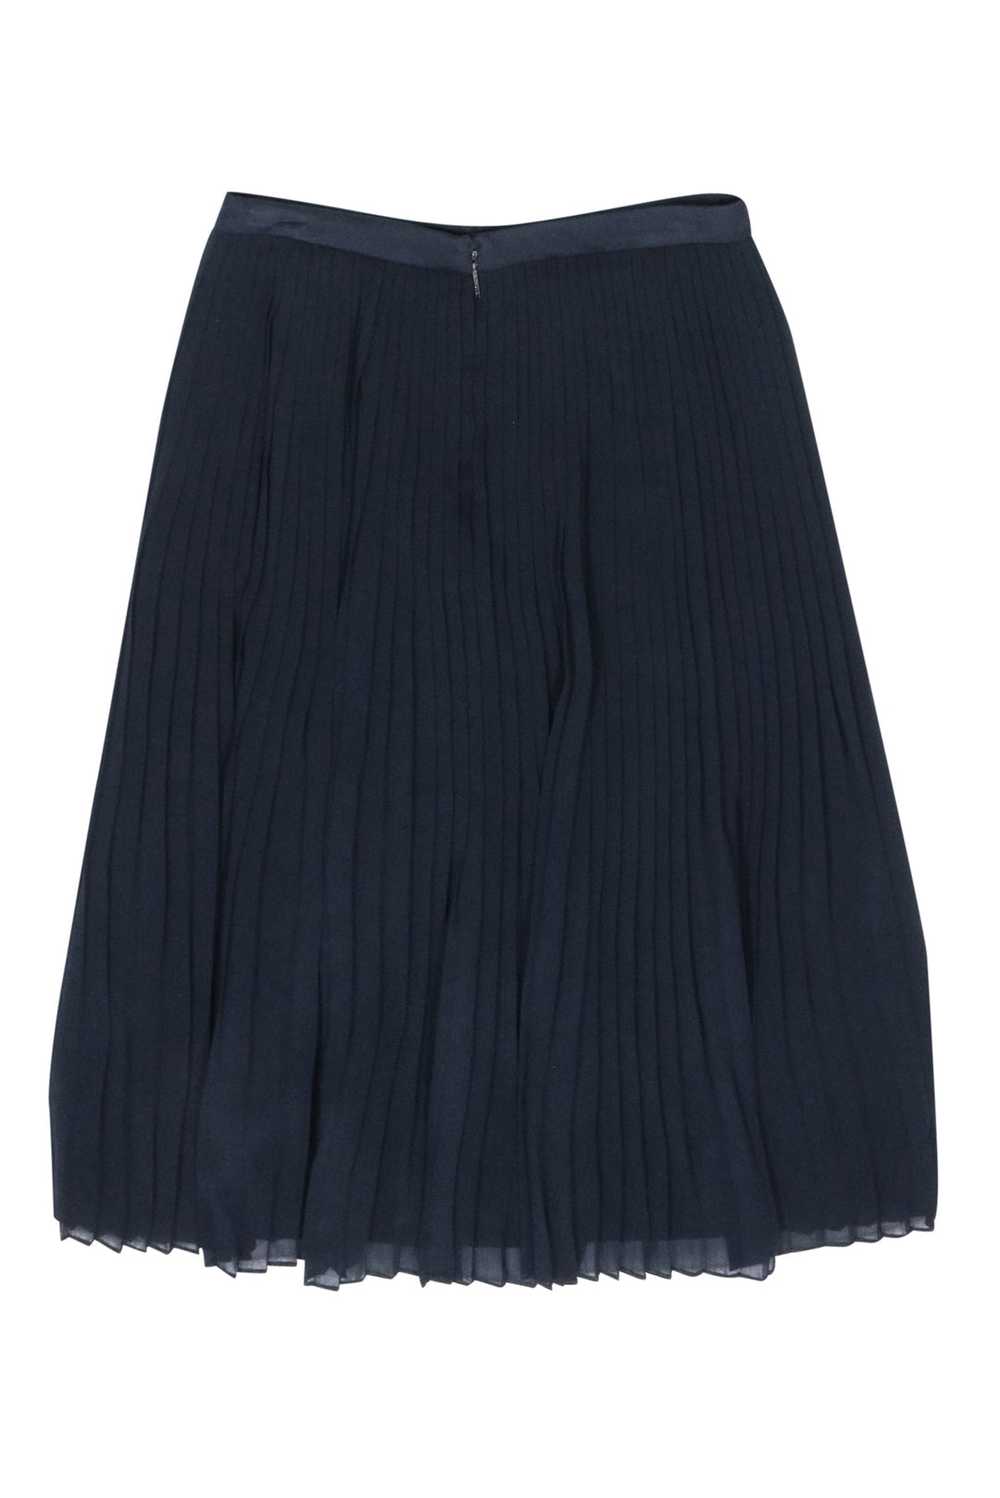 Tory Burch - Navy Silk Pleated Beaded Front Skirt… - image 2